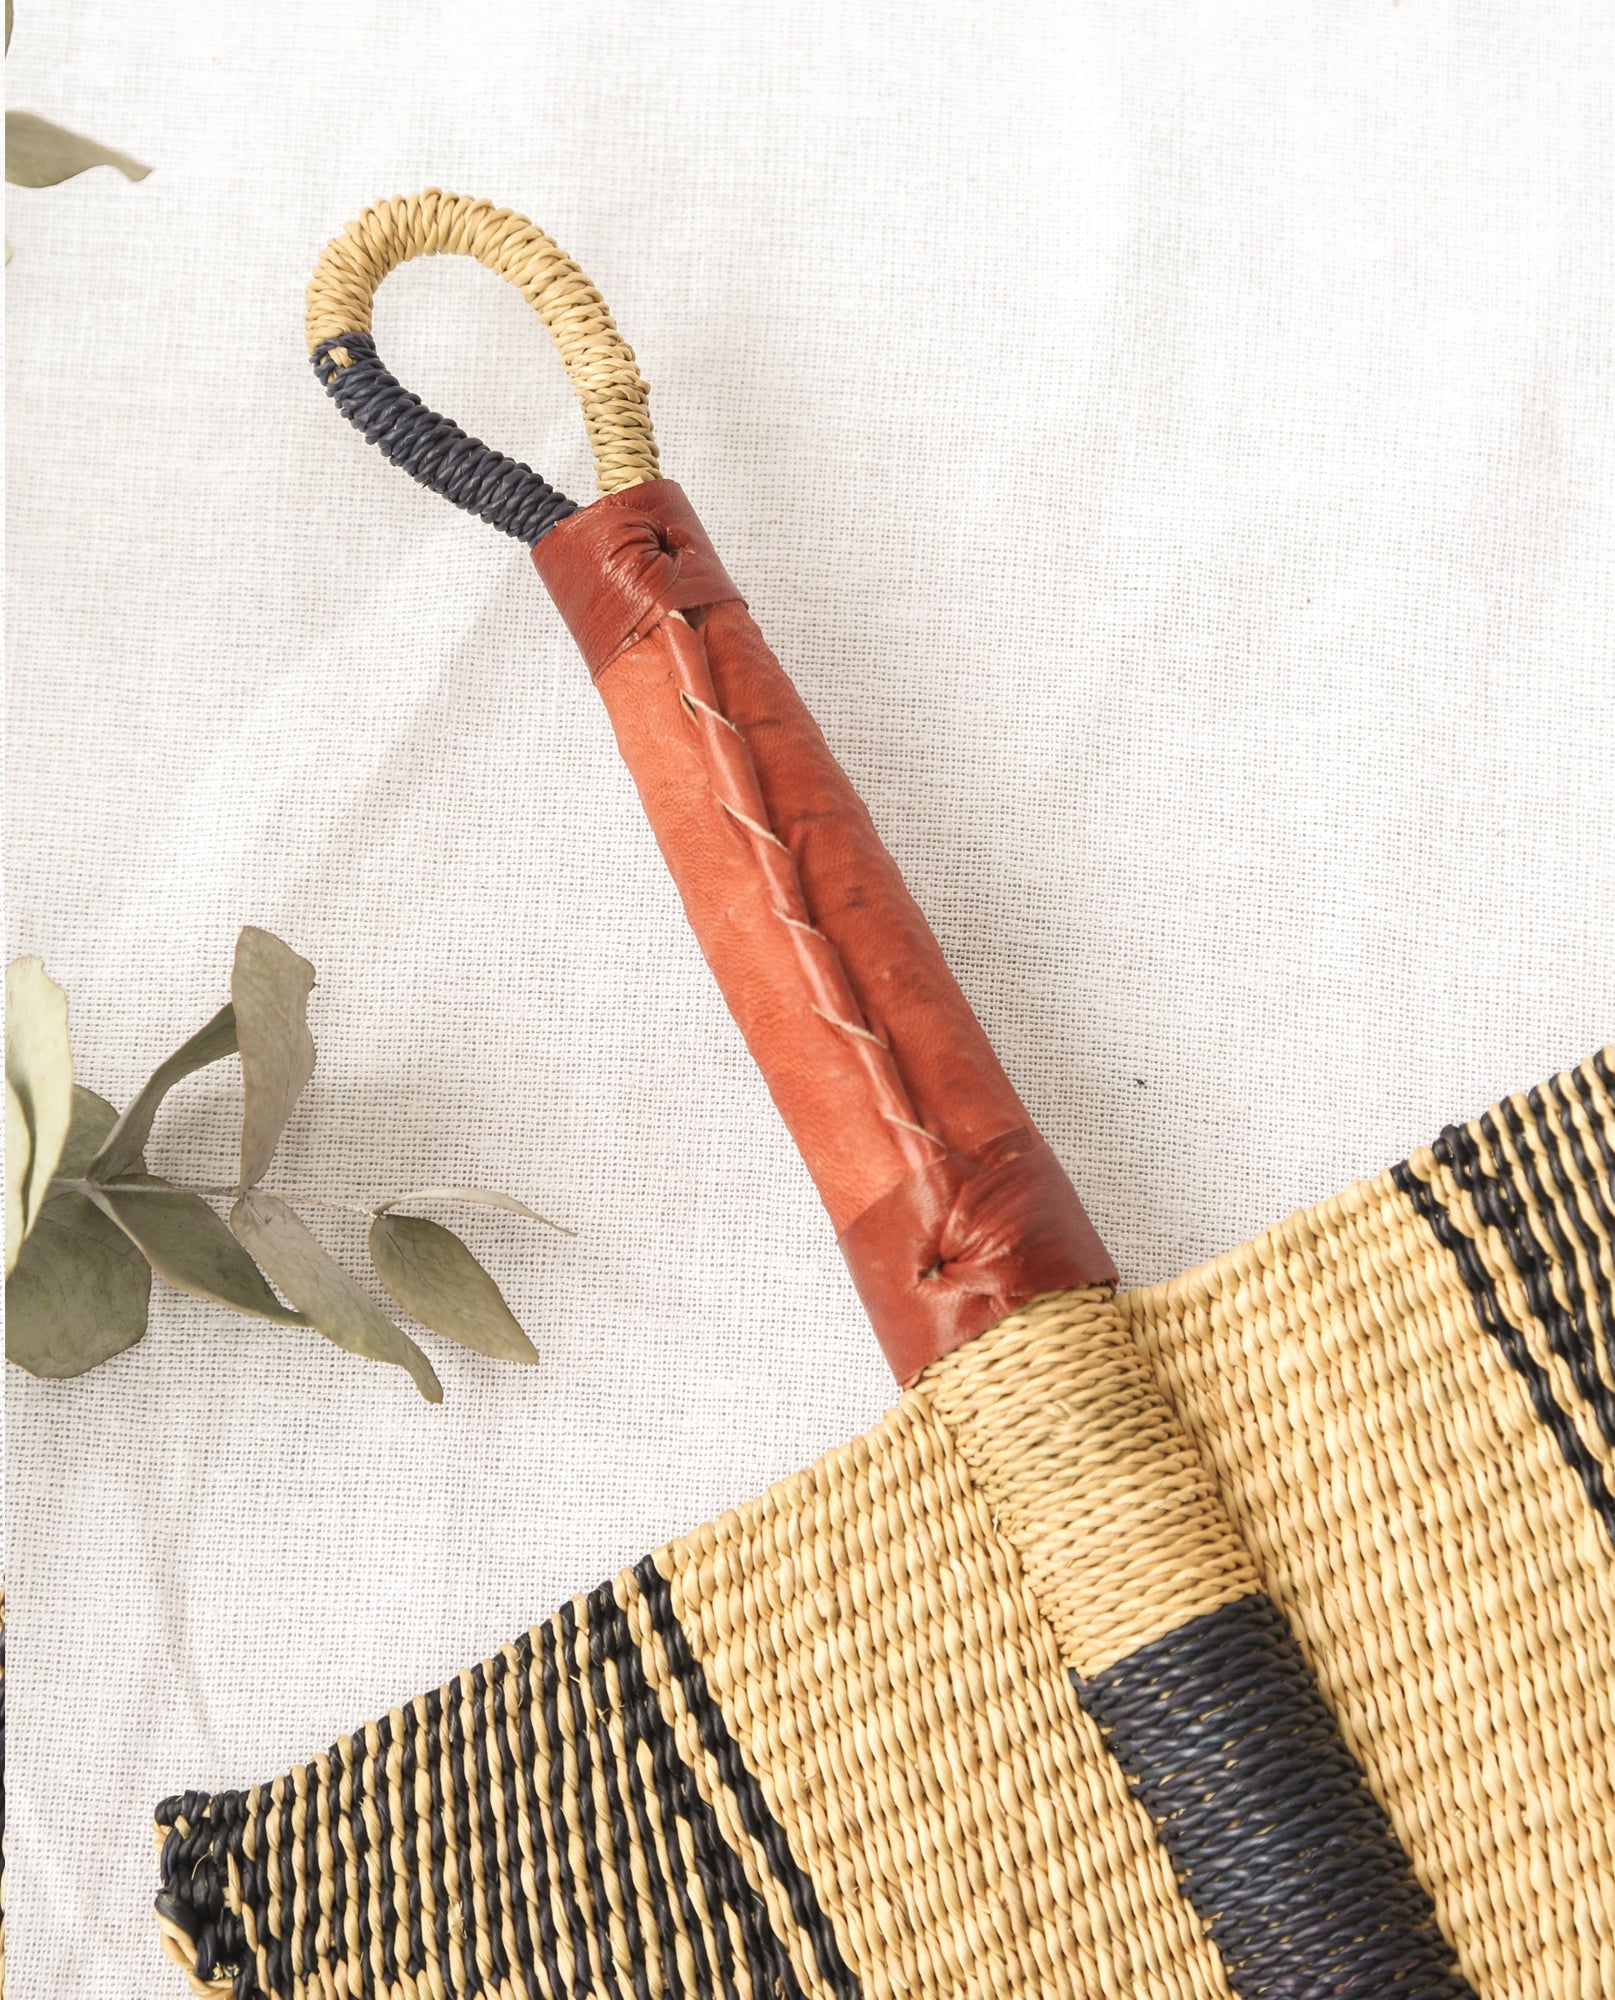 SELASIE Straw Hand Fan With Leather Handle